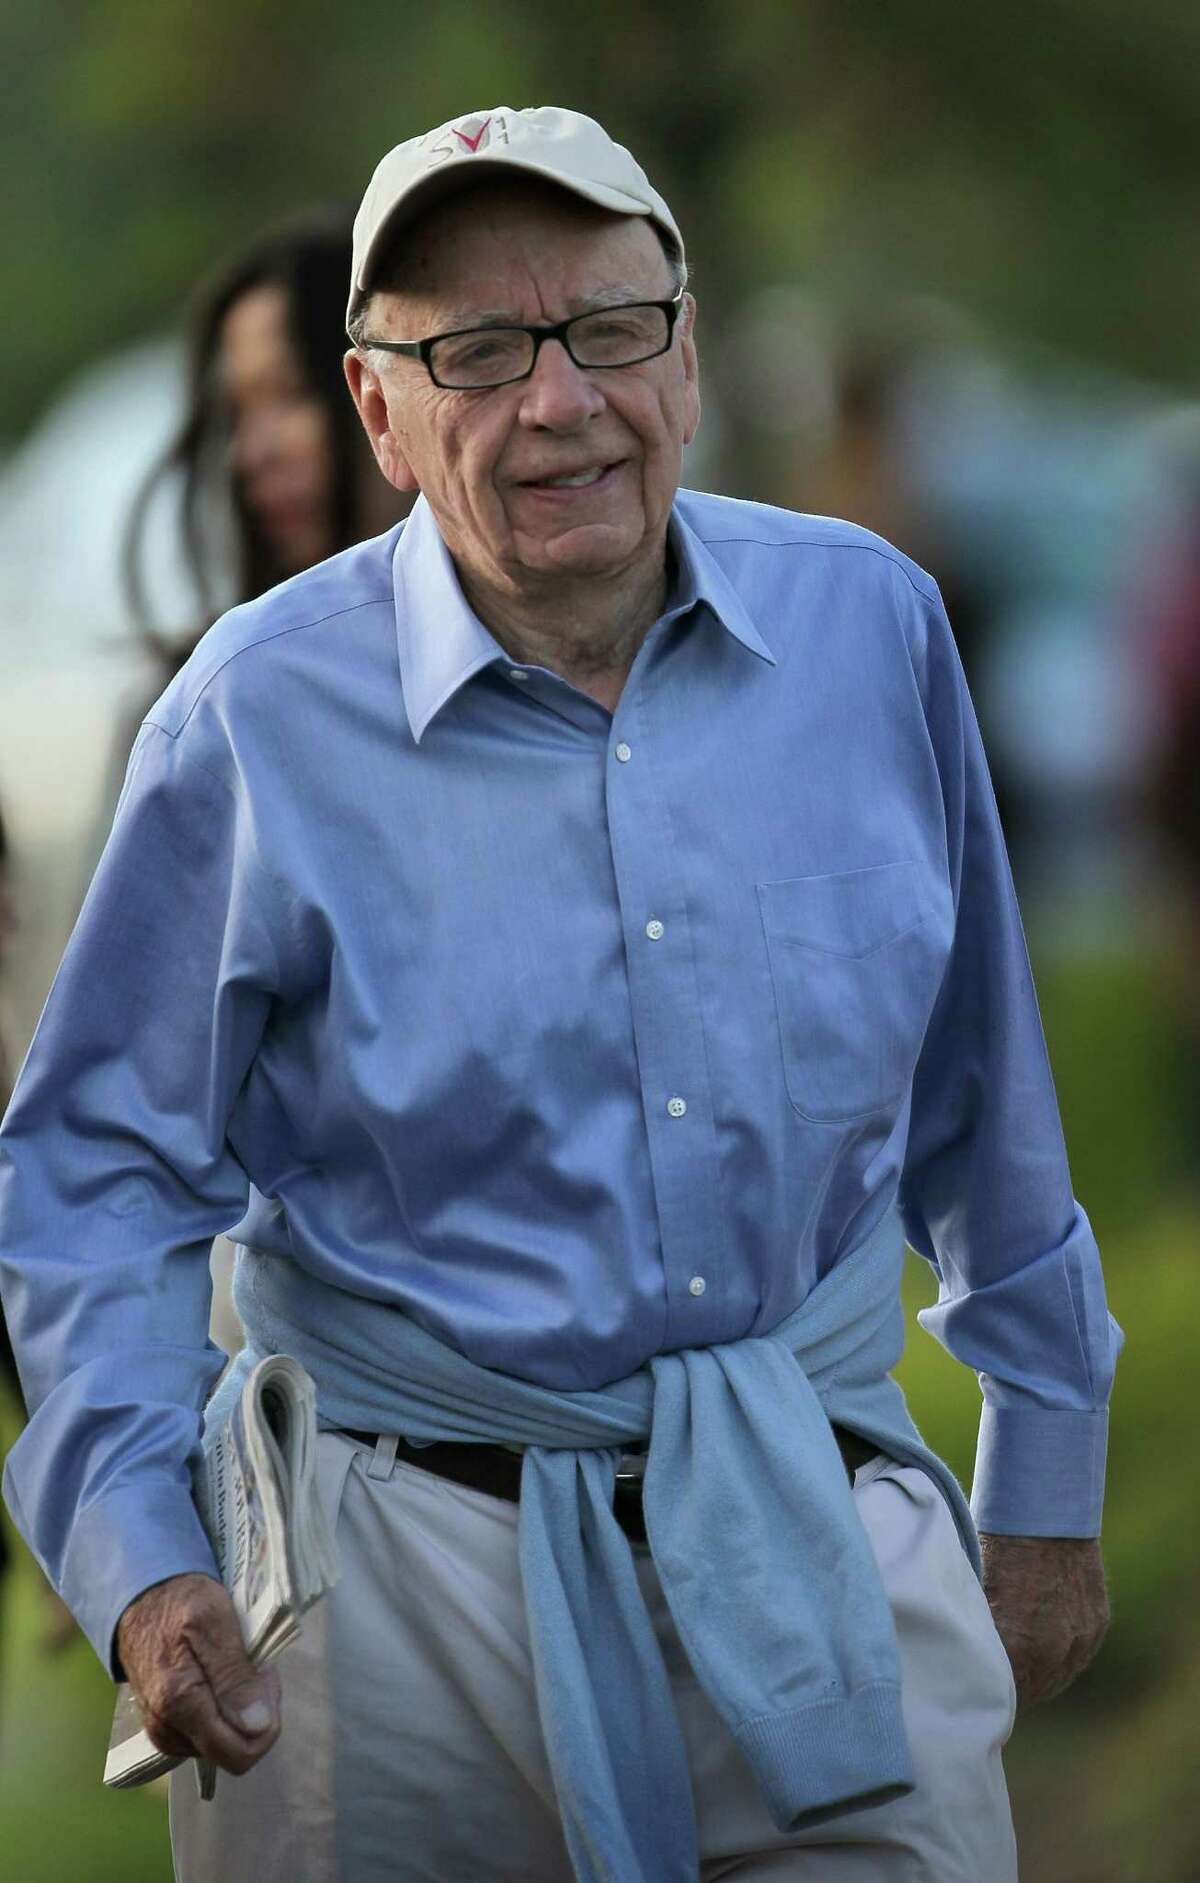 File photo of Rupert Murdoch, Chairman and CEO of News Corp. The takeover for the 61 percent of Sky that Murdoch’s 21st Century Fox does not already own was agreed on in December and is the second such effort to combine the two companies since 2011. The latest attempt quickly raised a wave of criticism in Britain, where Murdoch already holds several media interests.